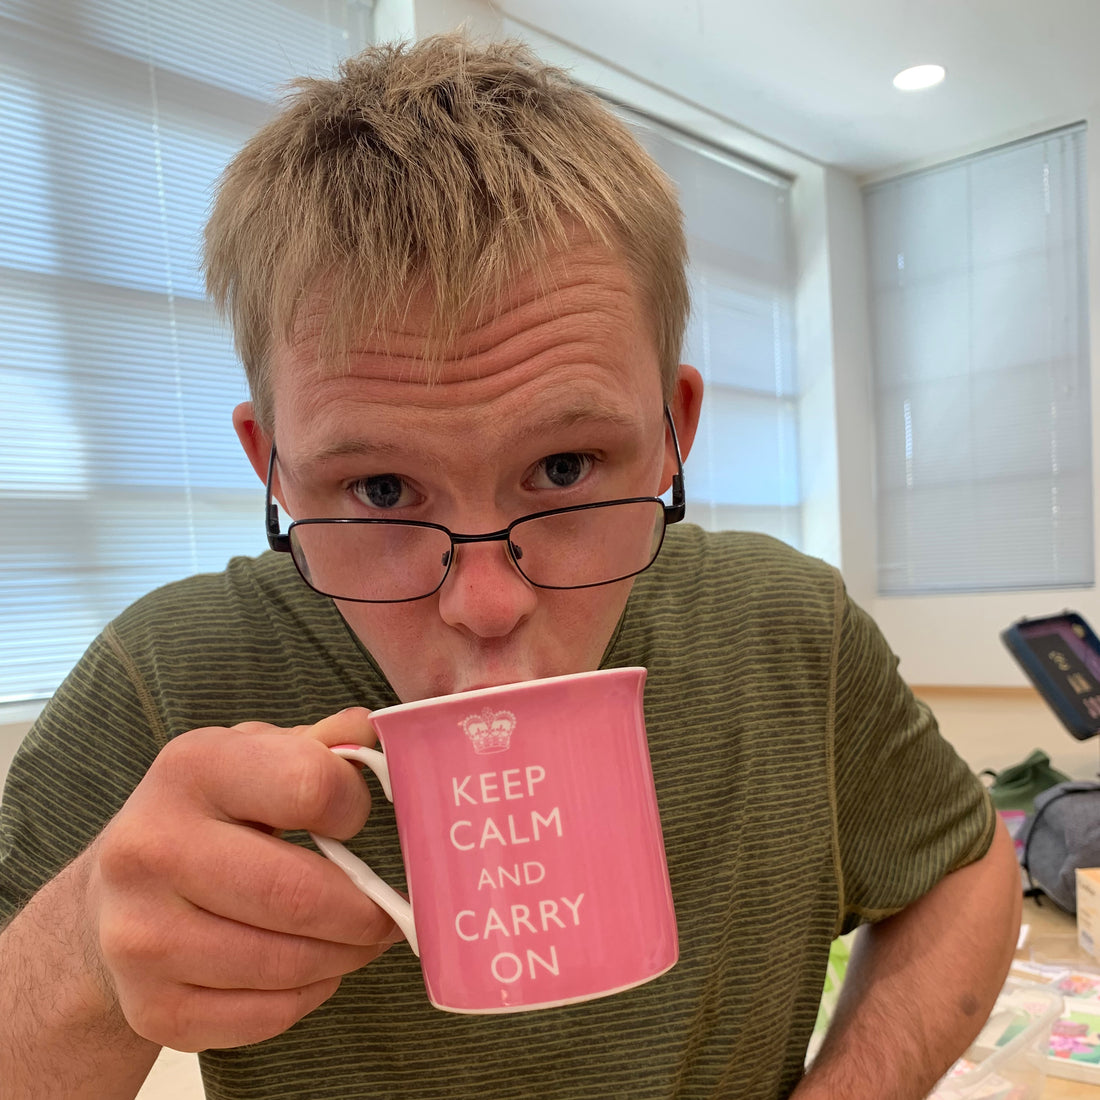 man in green shirt drink from a mug that reads "keep calm and carry on"